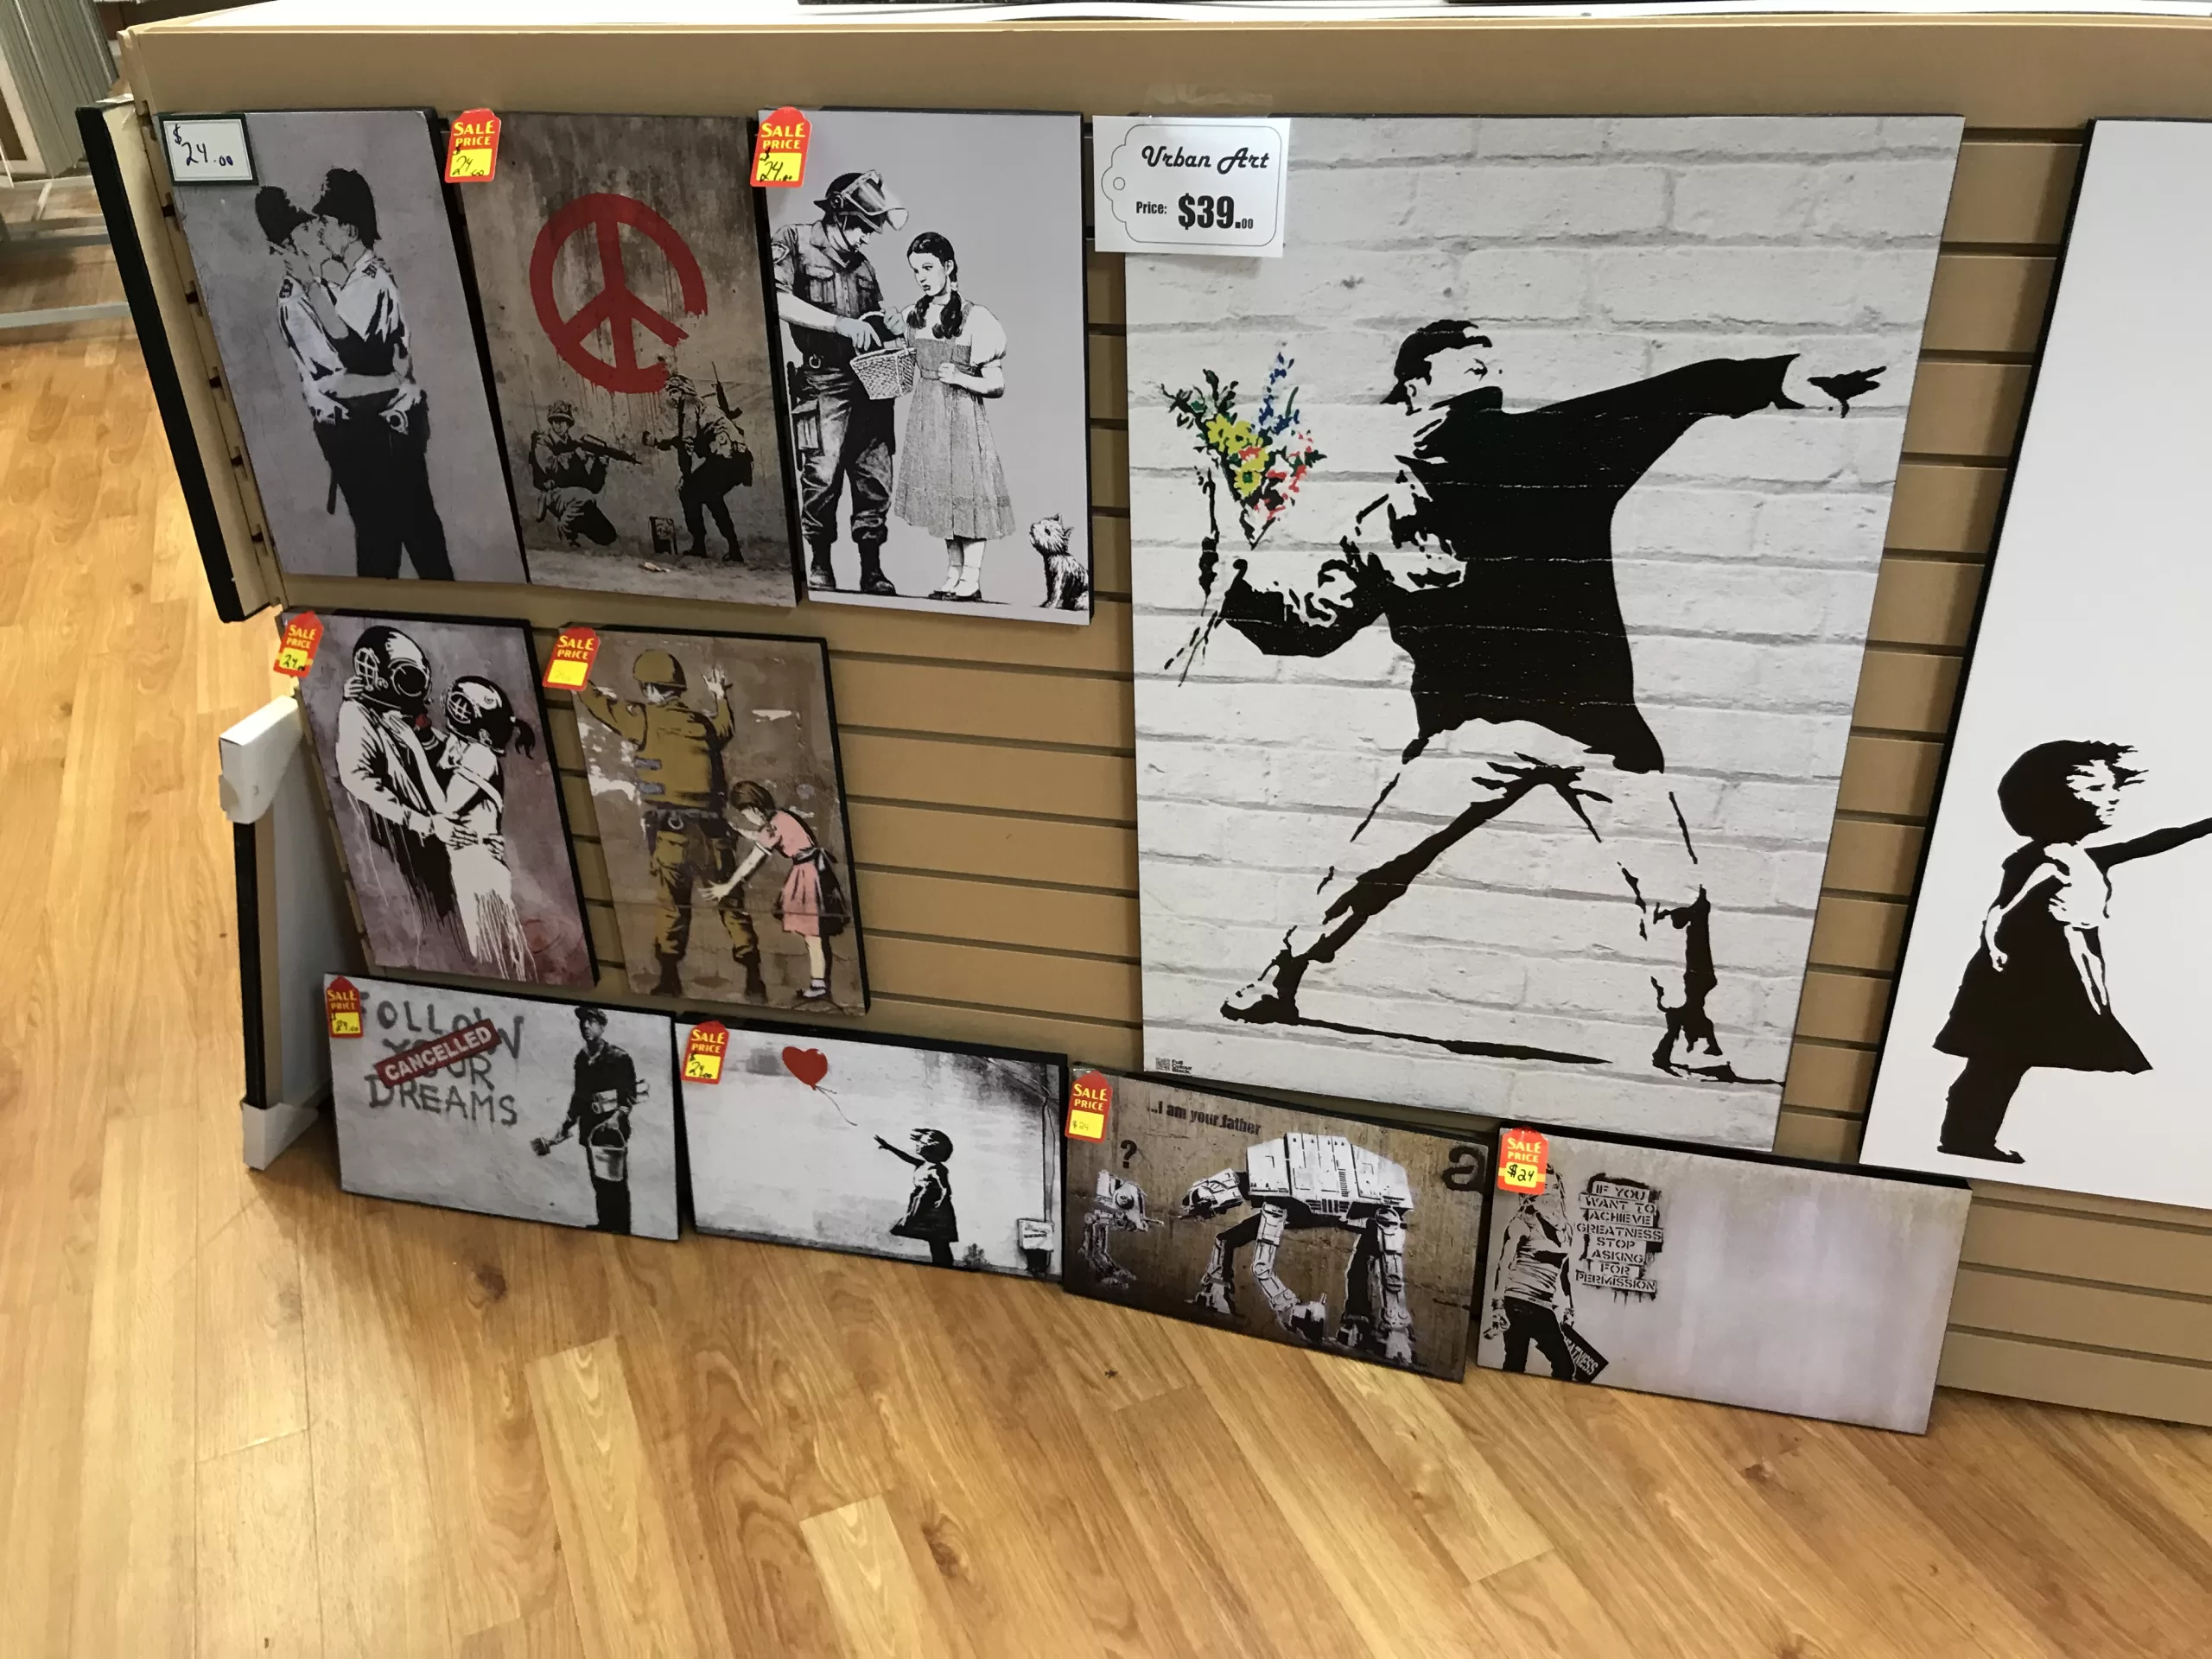 A collection of Banksy art reproductions for sale.